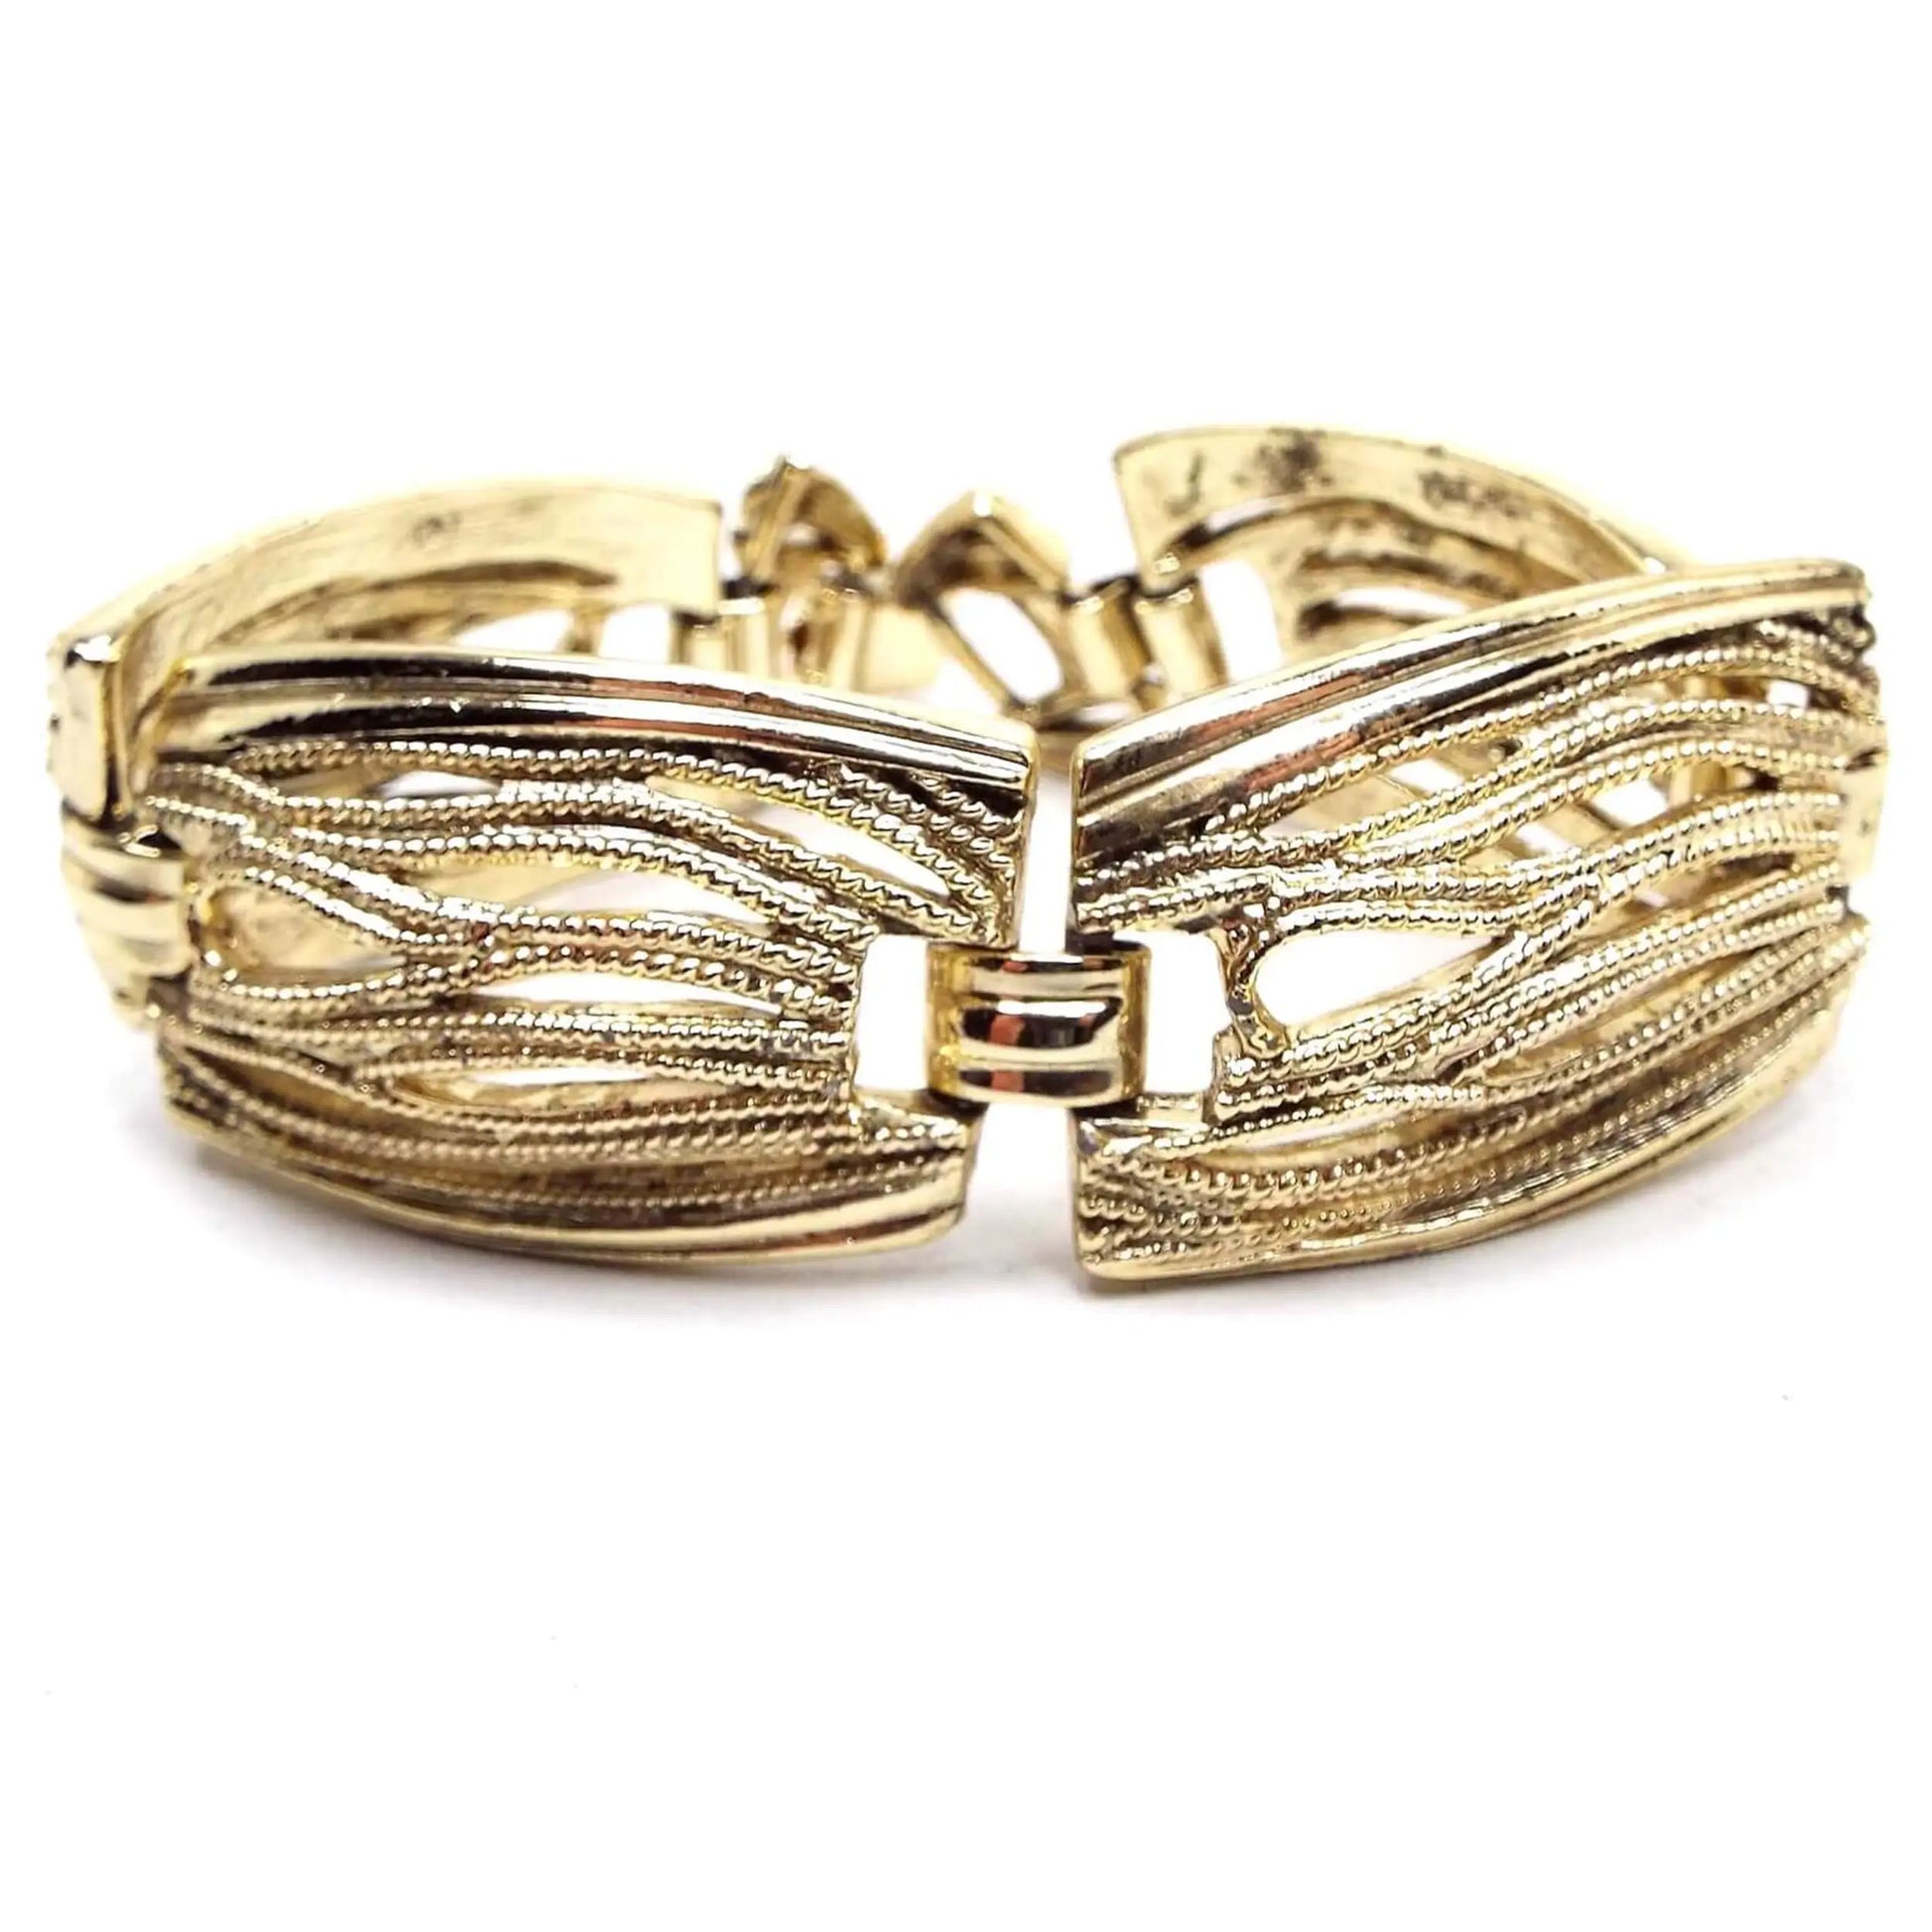 Front view of the Mid Century vintage filigree link bracelet. The metal is gold tone in color. The links are large rectangles with rounded sides and have a cut out filigree design.